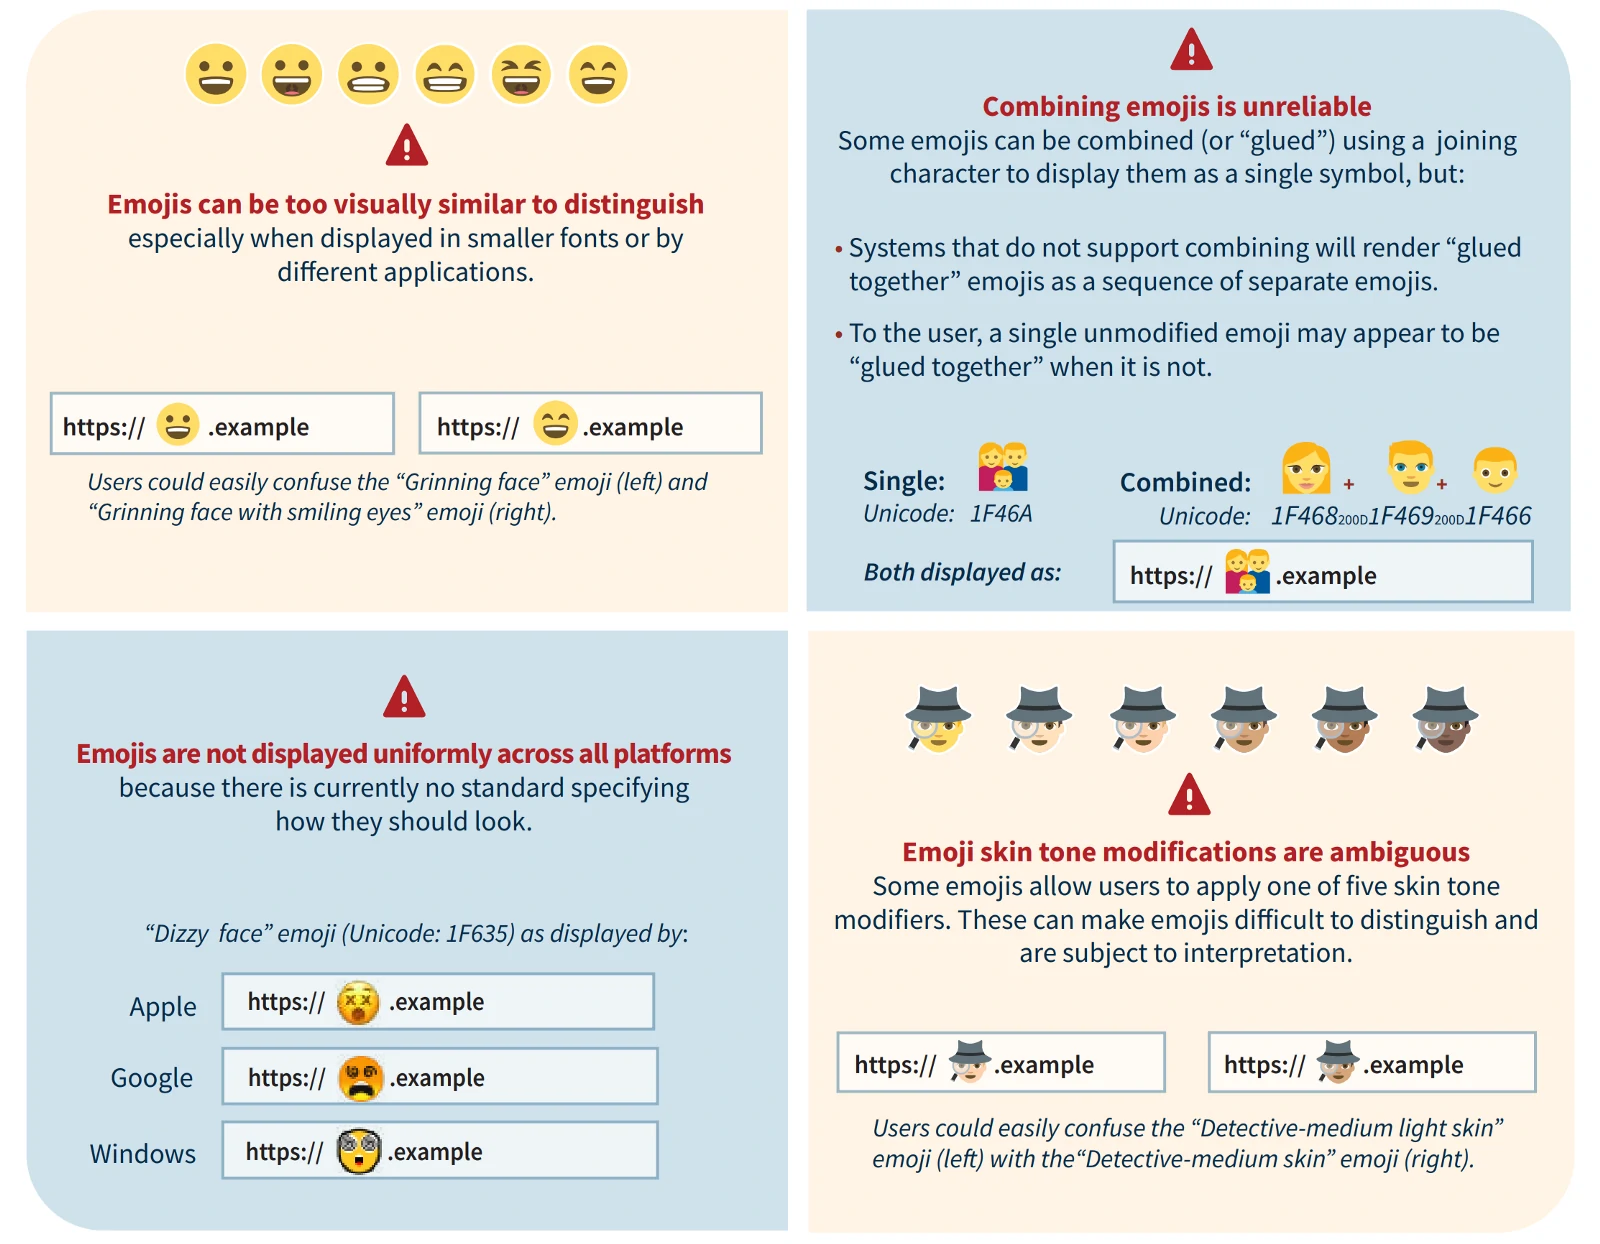 Graphic from ICANN indicating the risks with regard to emojis in domain names.